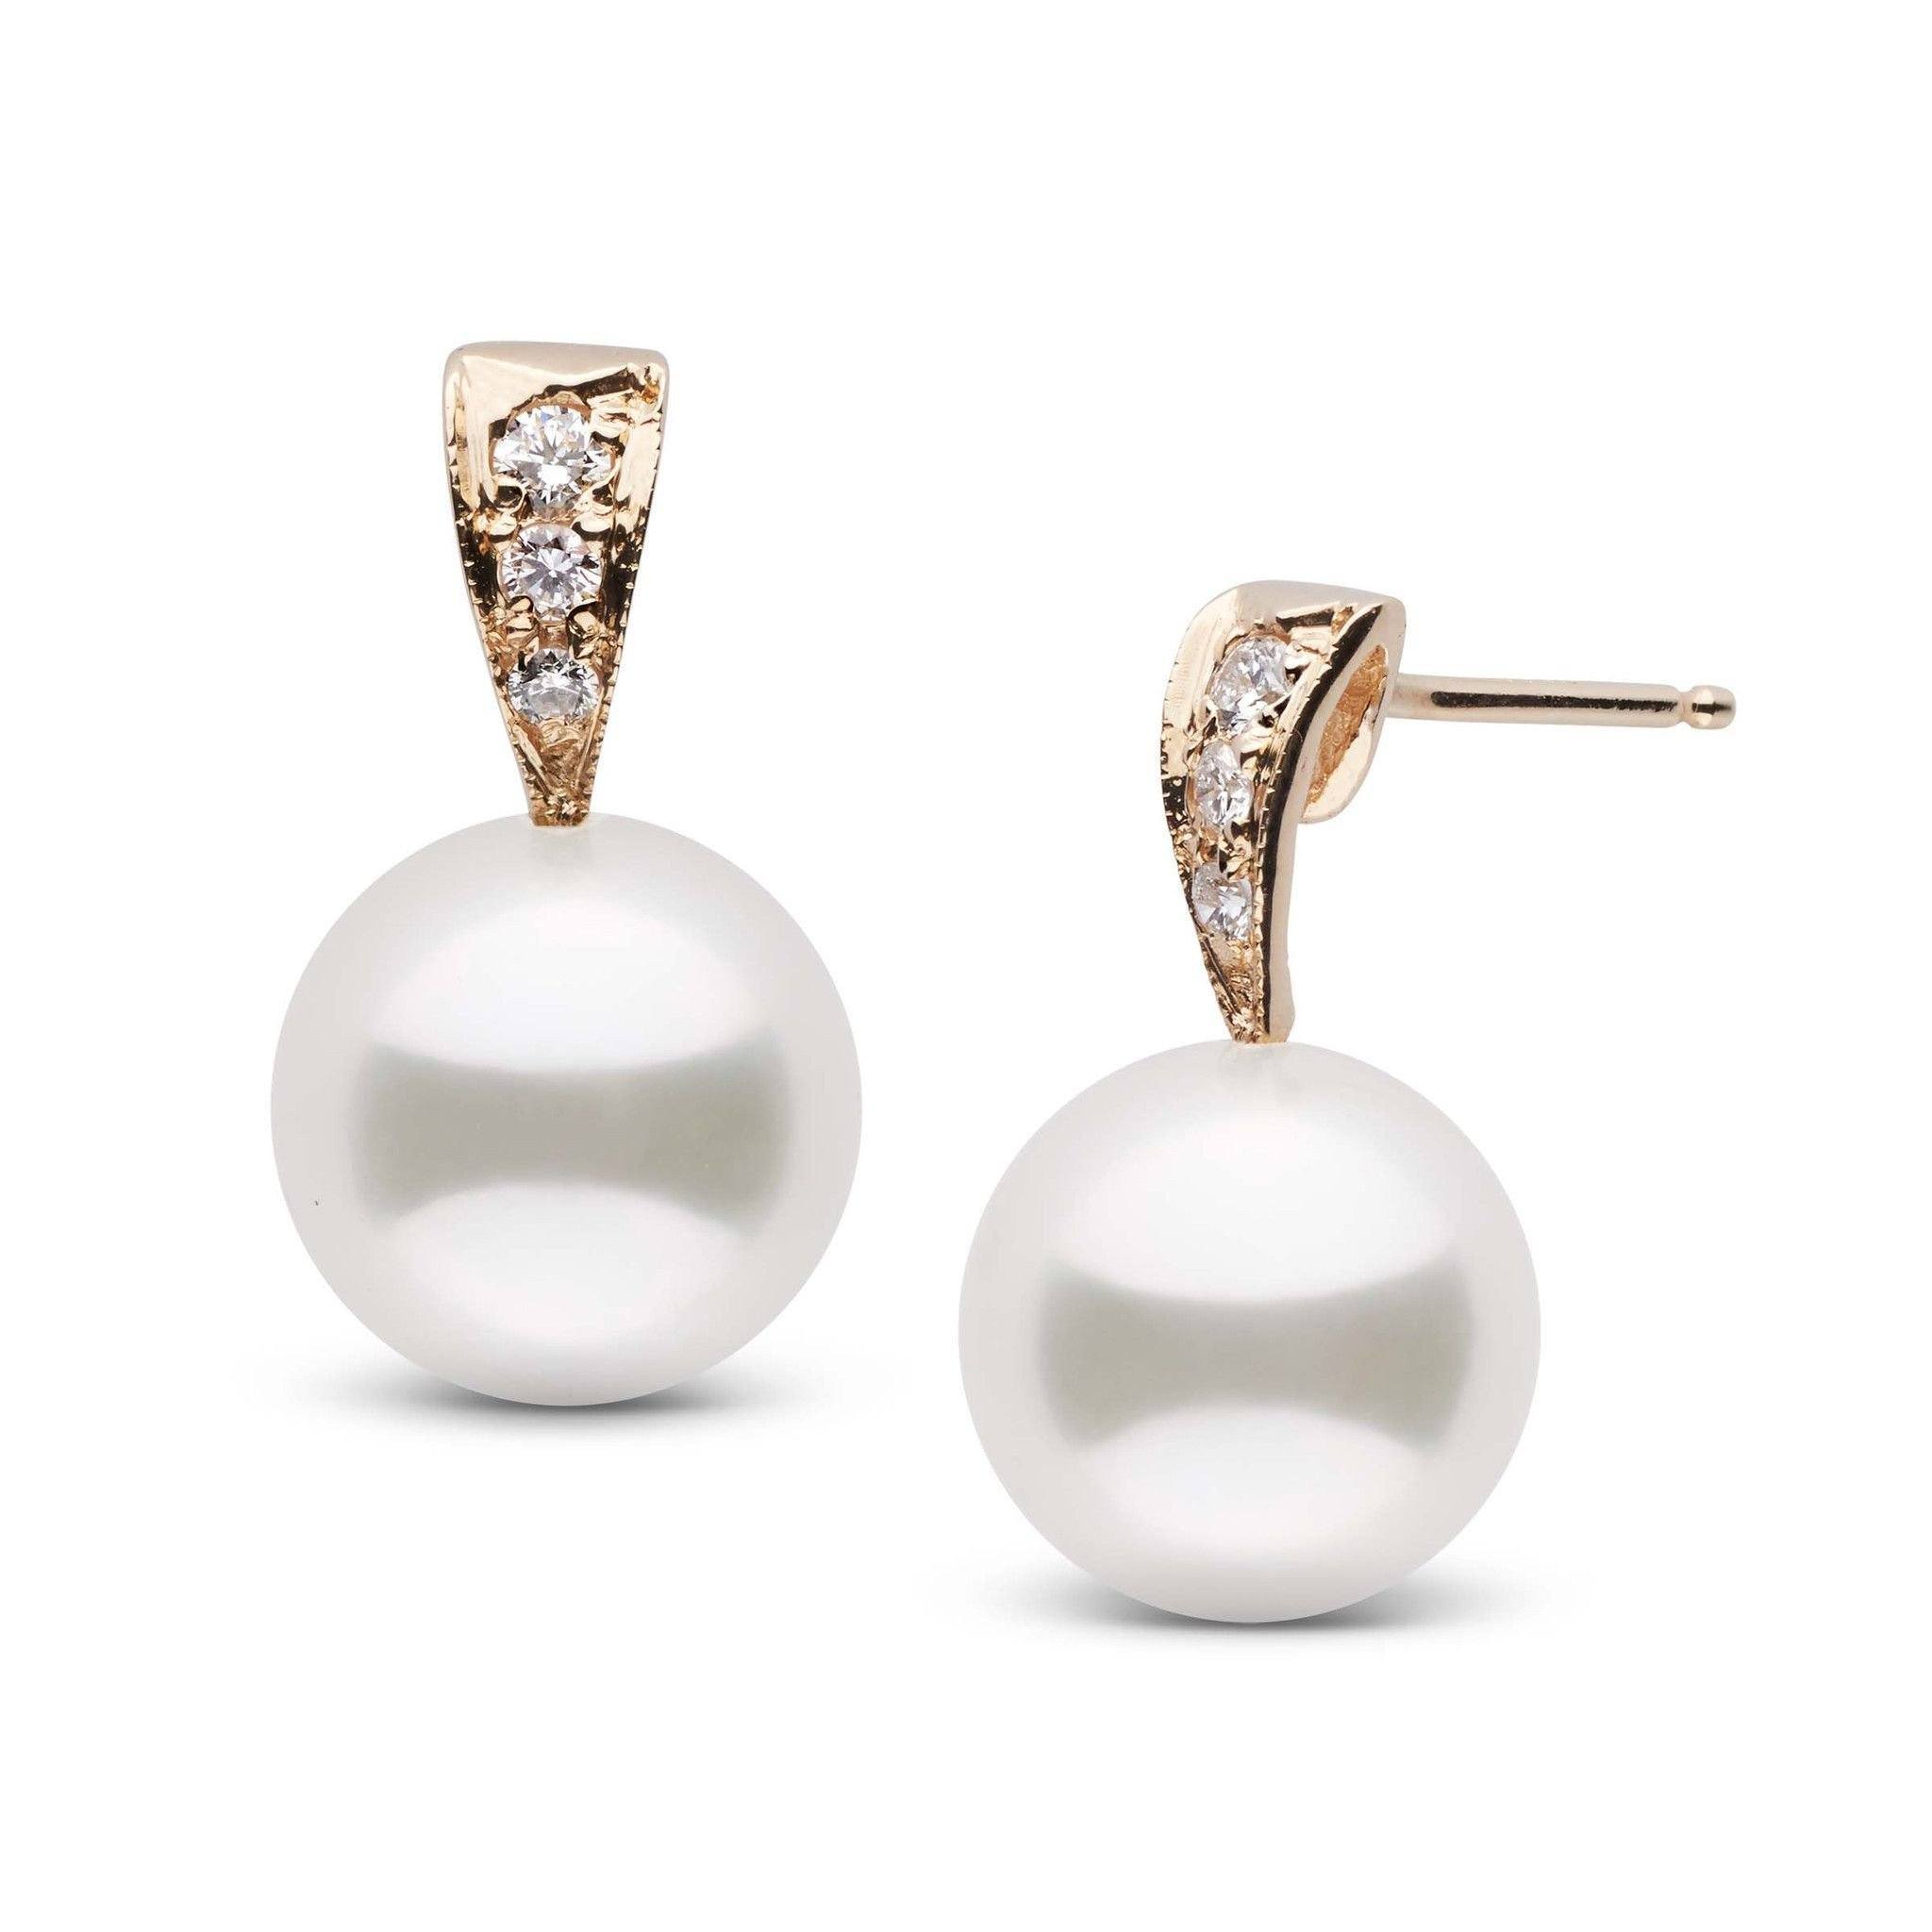 Desire Collection White South Sea 9.0-10.0 mm Pearl and Diamond Earrings